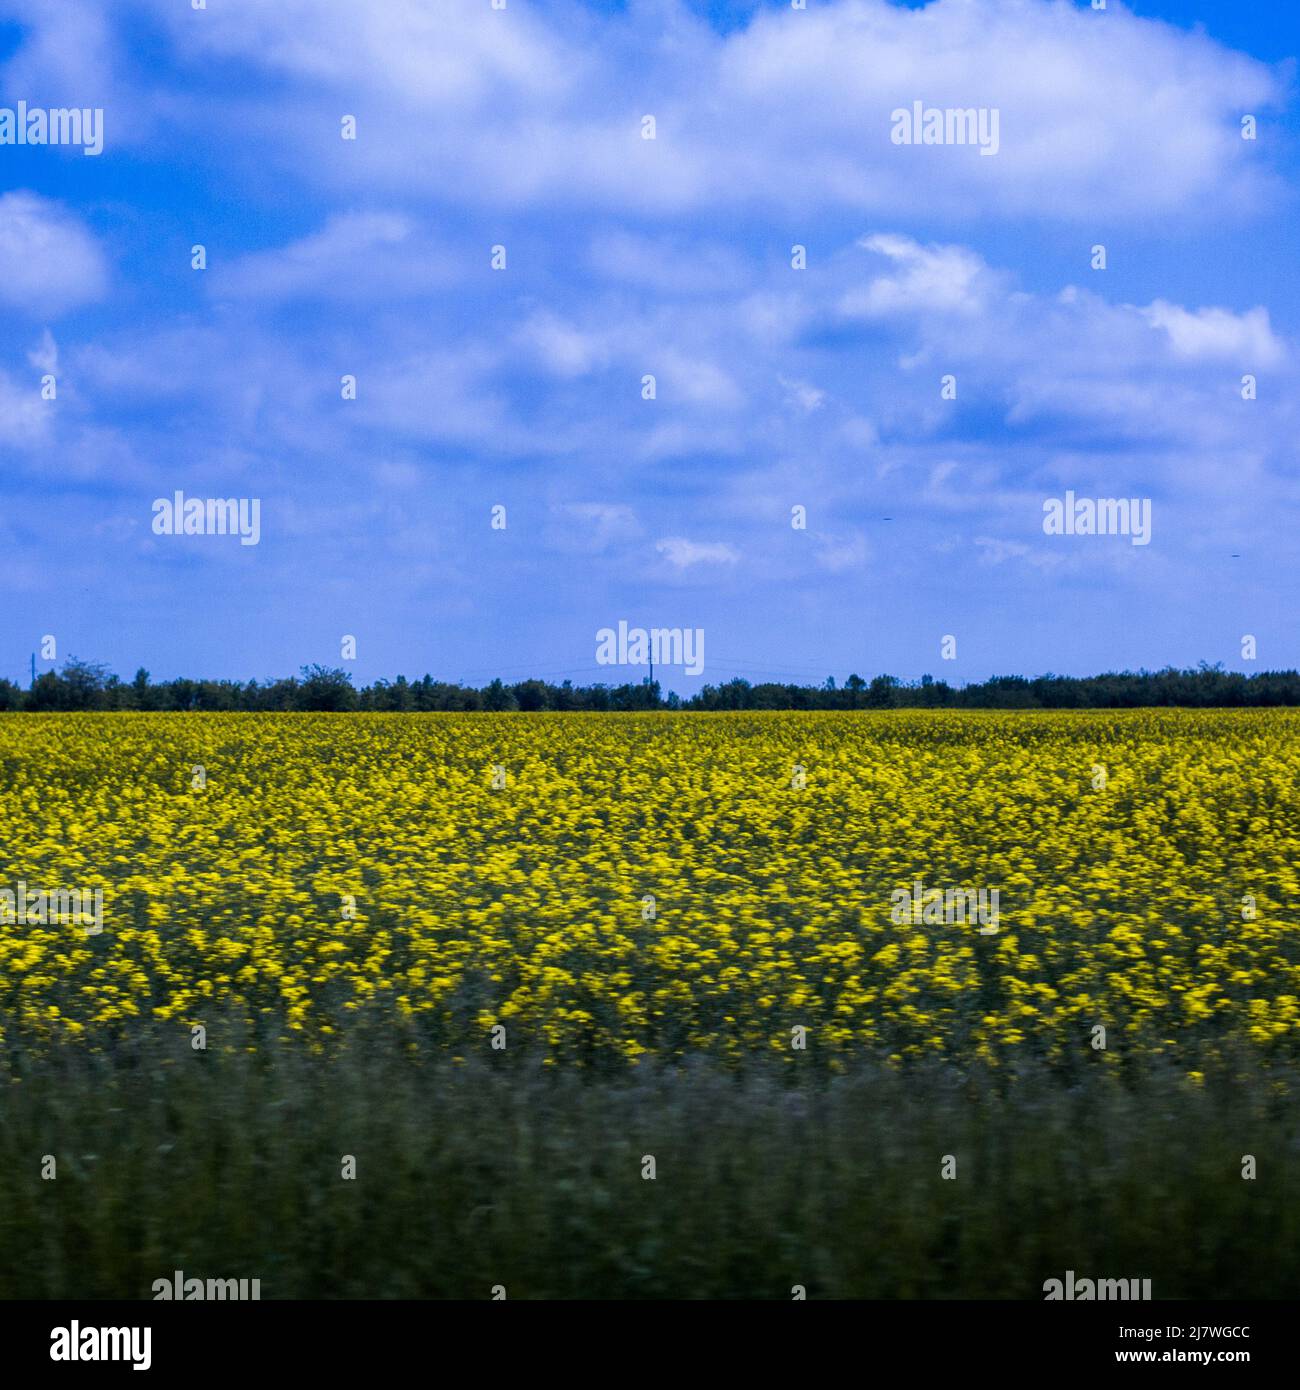 Michael Bunel / Le Pictorium -  The colors of Ukraine -  10/05/2014  -  Ukraine / Donbass / Odessa  -  On the road between Odessa and Donetsk. Blue fi Stock Photo